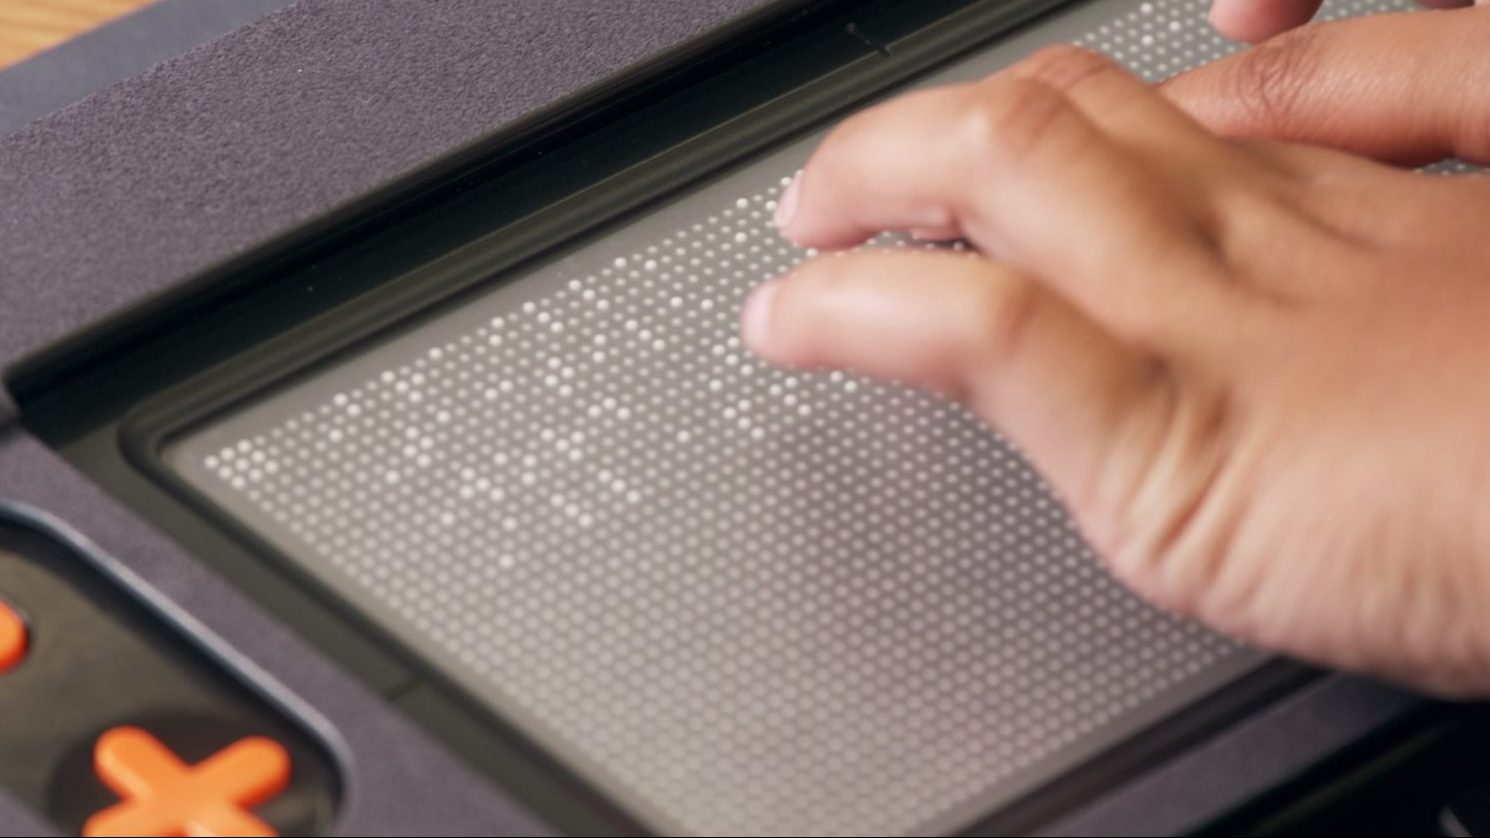 Hands reading multiple lines of braille on a 10 line refreshable braille display.